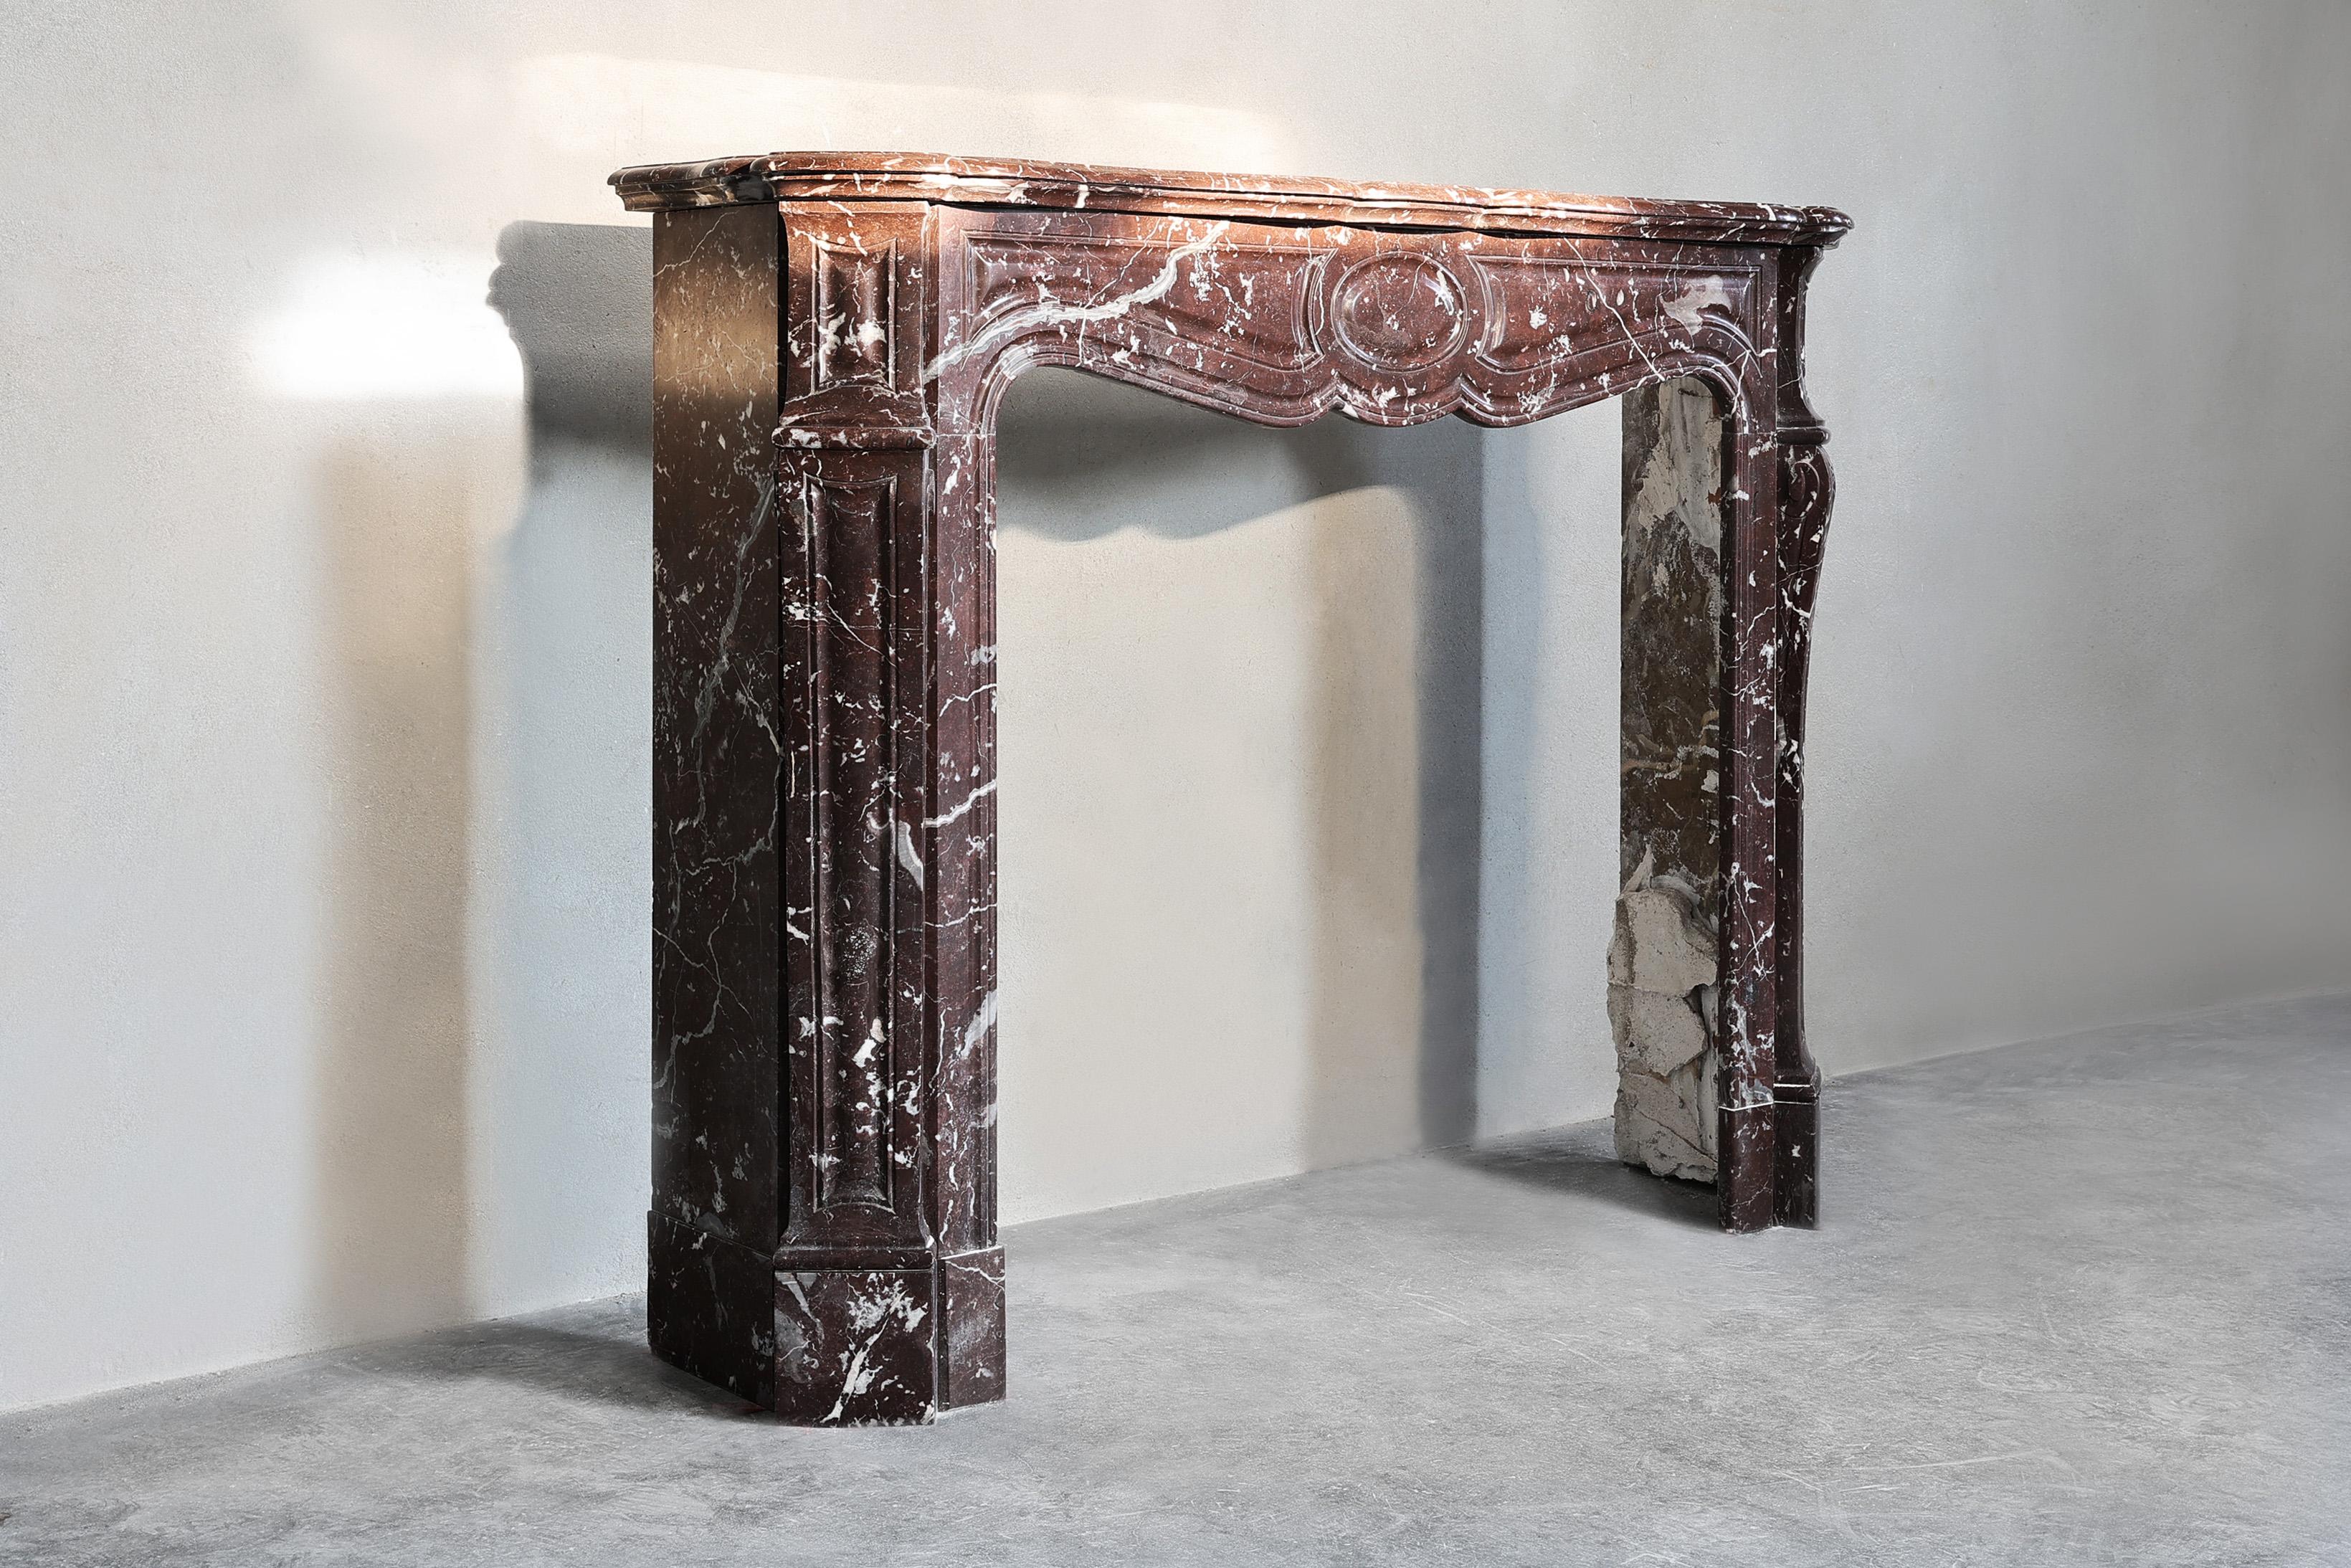 Beautiful compact mantelpiece made of Griotte Rouge marble! This antique fireplace is in Pompadour style and has a nice warm appearance. This compact model is elegant and has a graceful appearance.